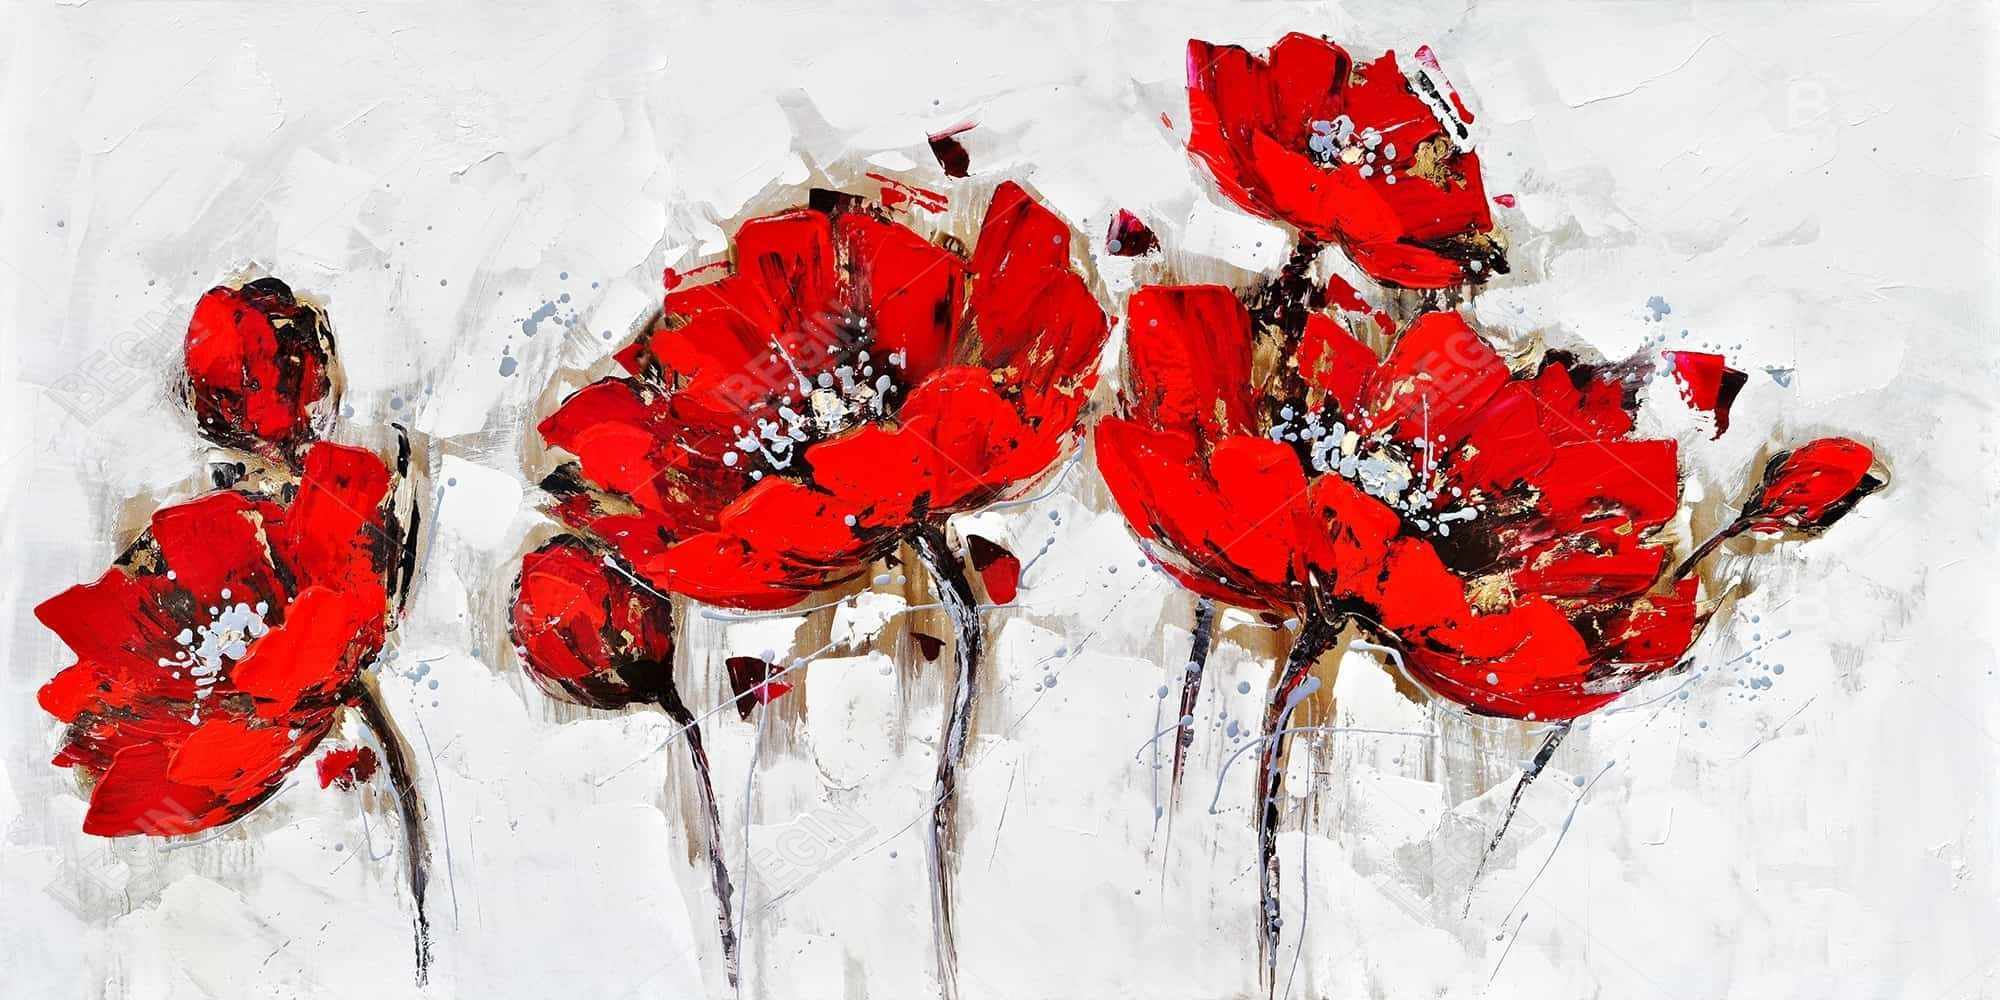 Abstract poppy flowers | Fine art print on canvas 48